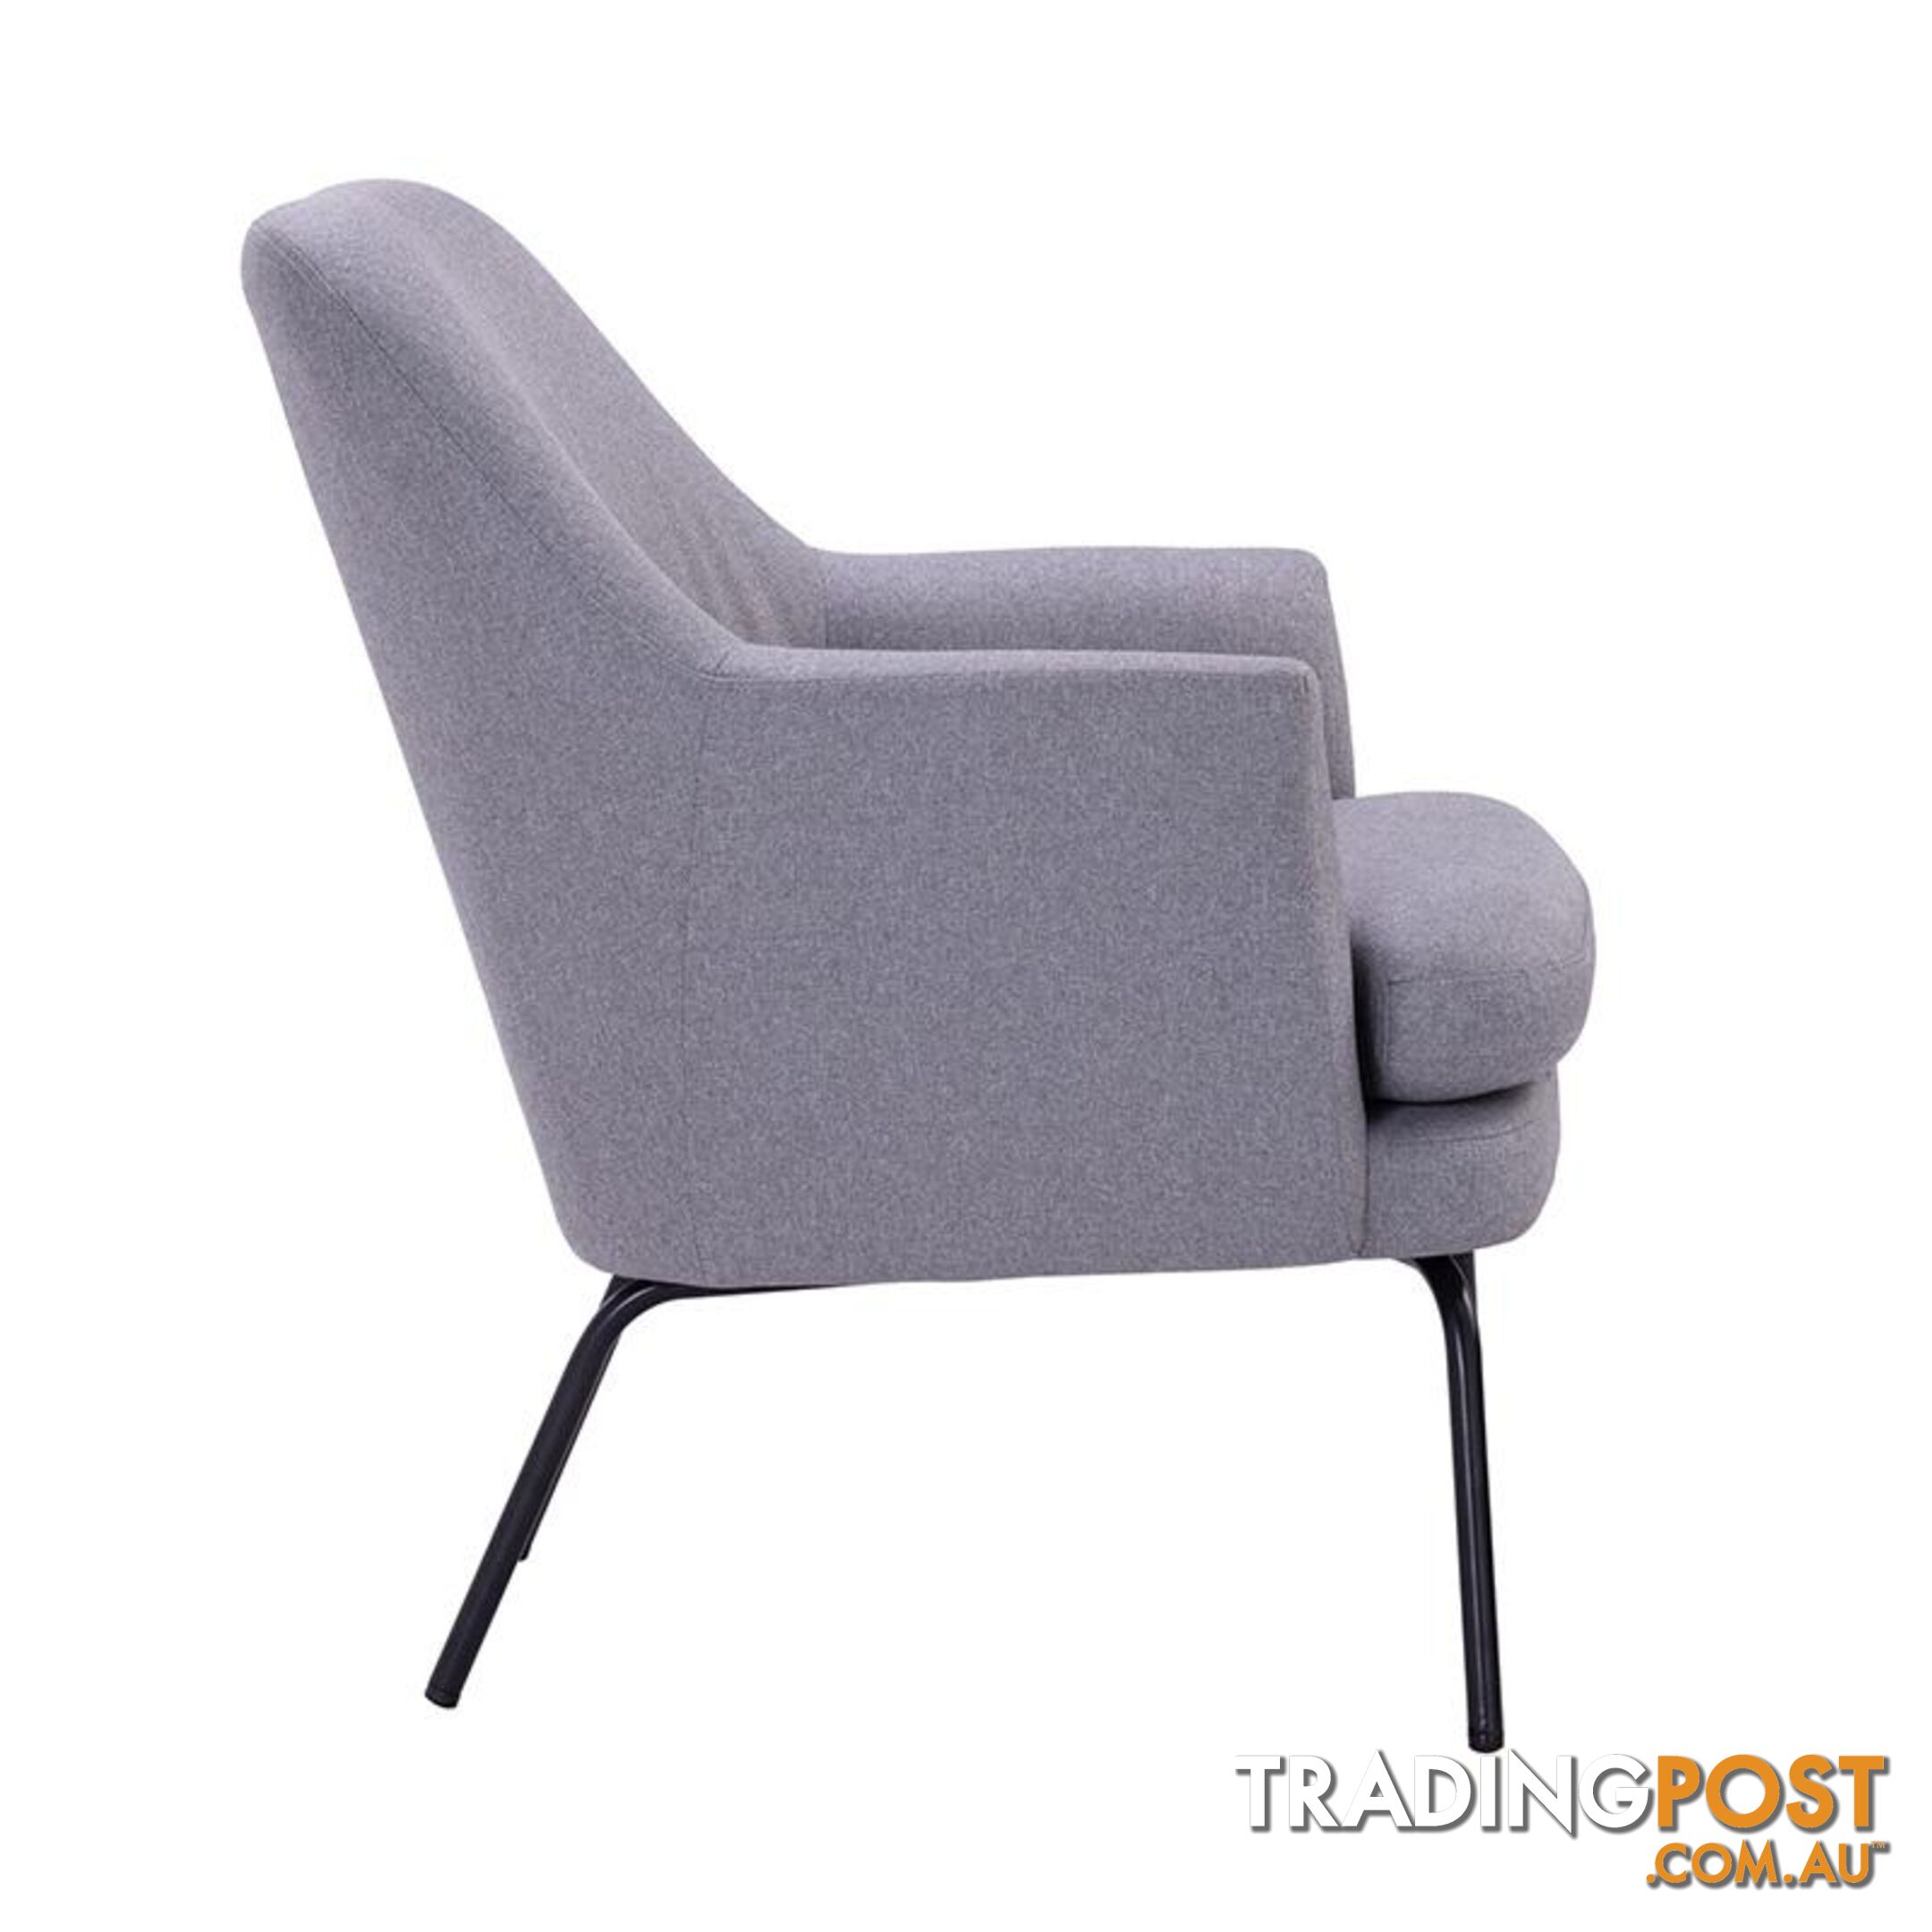 LUCIAN Lounge Chair - Pewter Grey - 231193 - 9334719000770